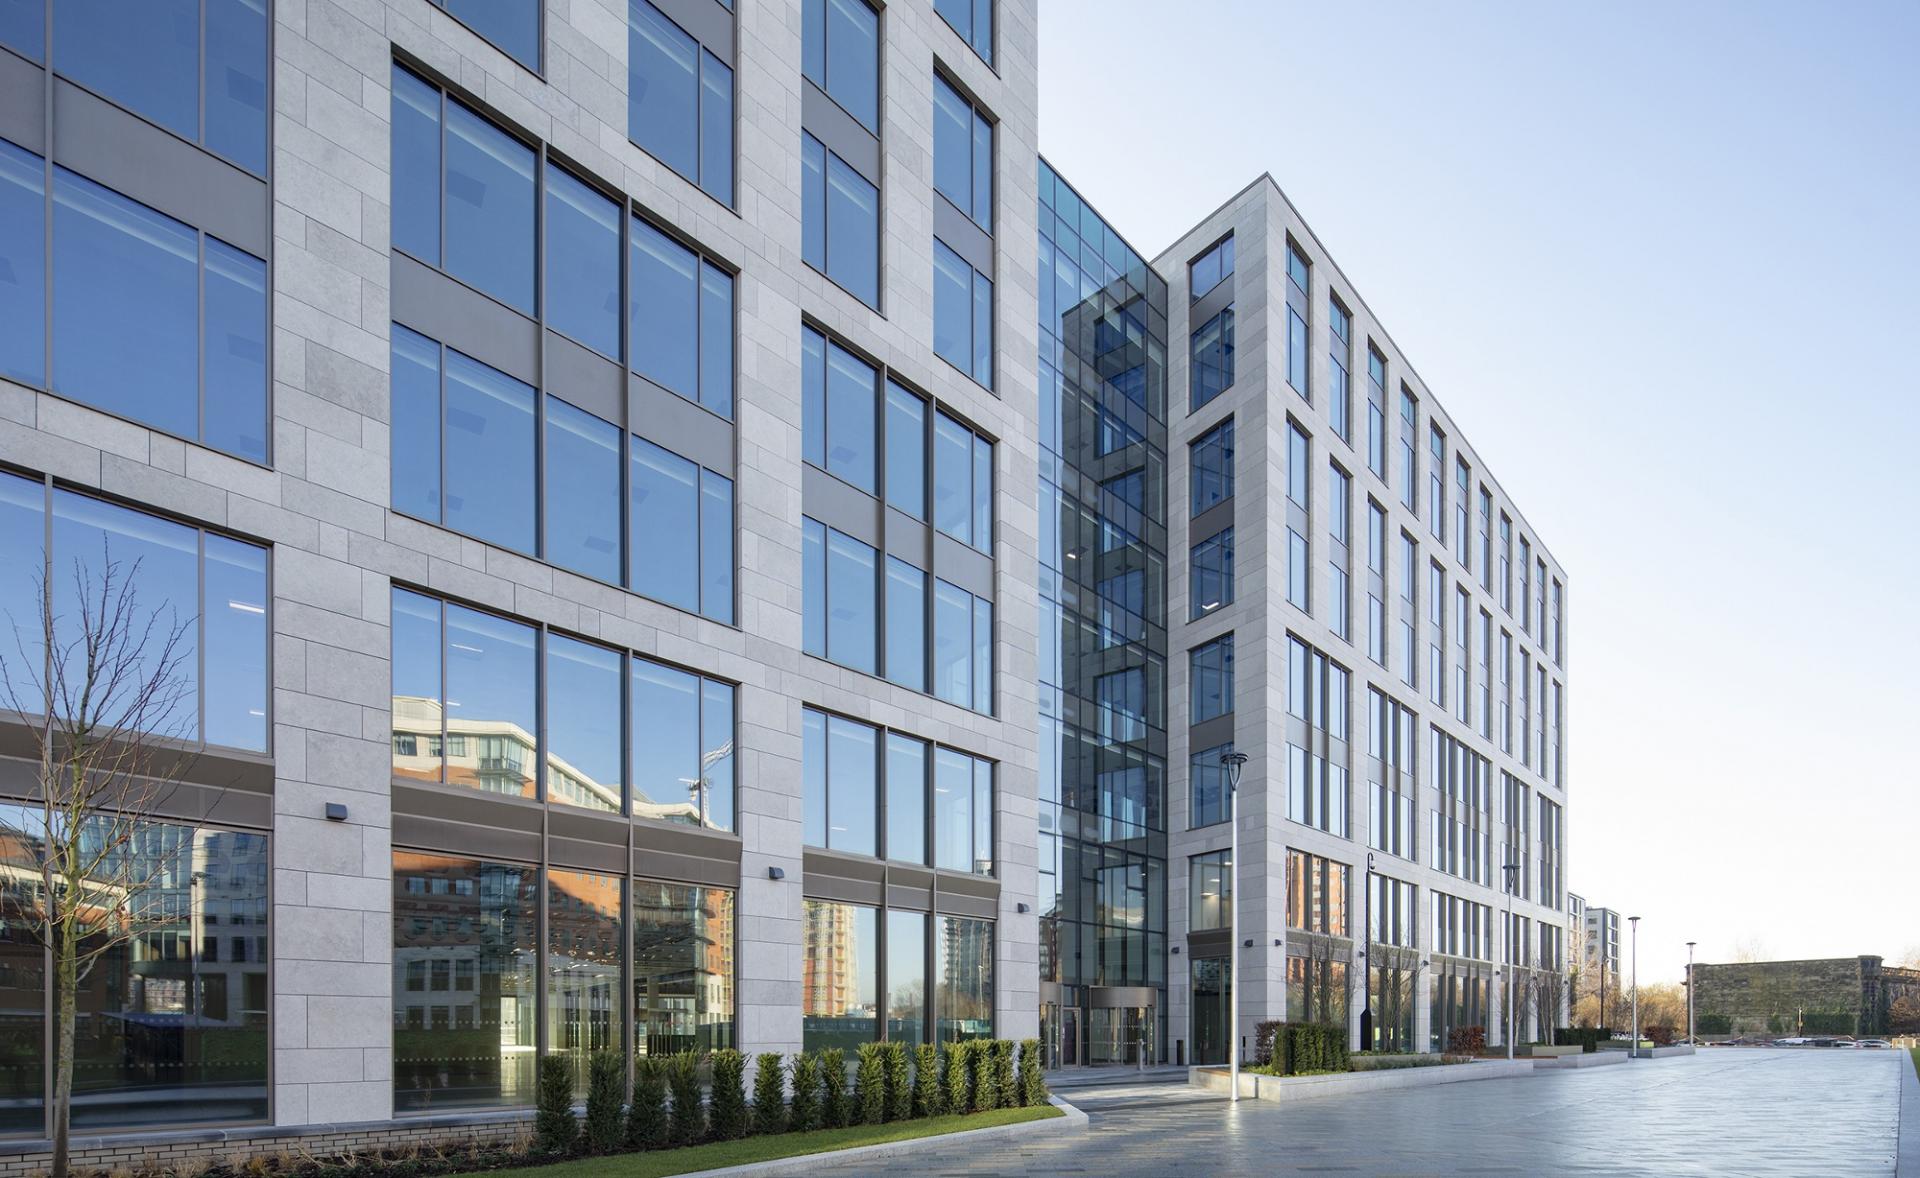 Administrators exploring sale of &pound;18m-turnover building fa&ccedil;ade firm